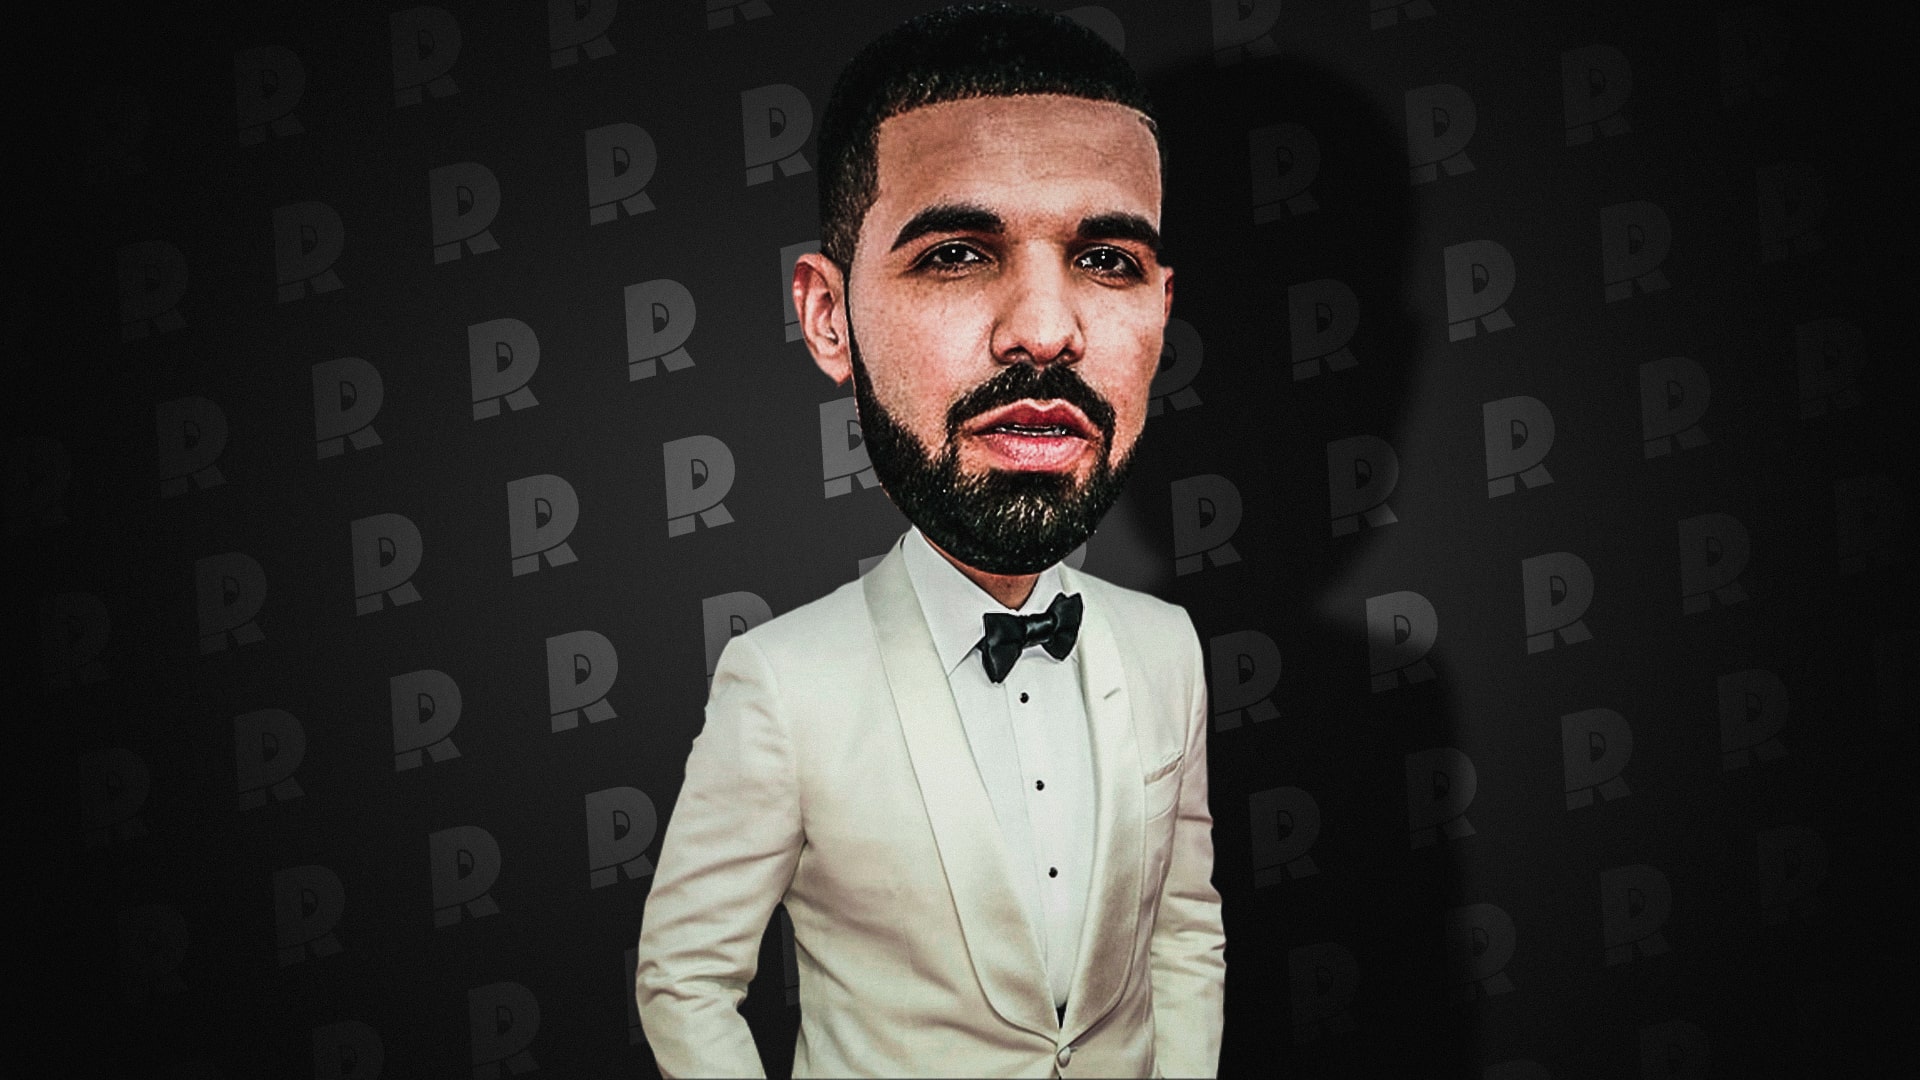 Drake Net worth $200 Million - Who Is the Richest Hip Hop Artist in the World of 2022?